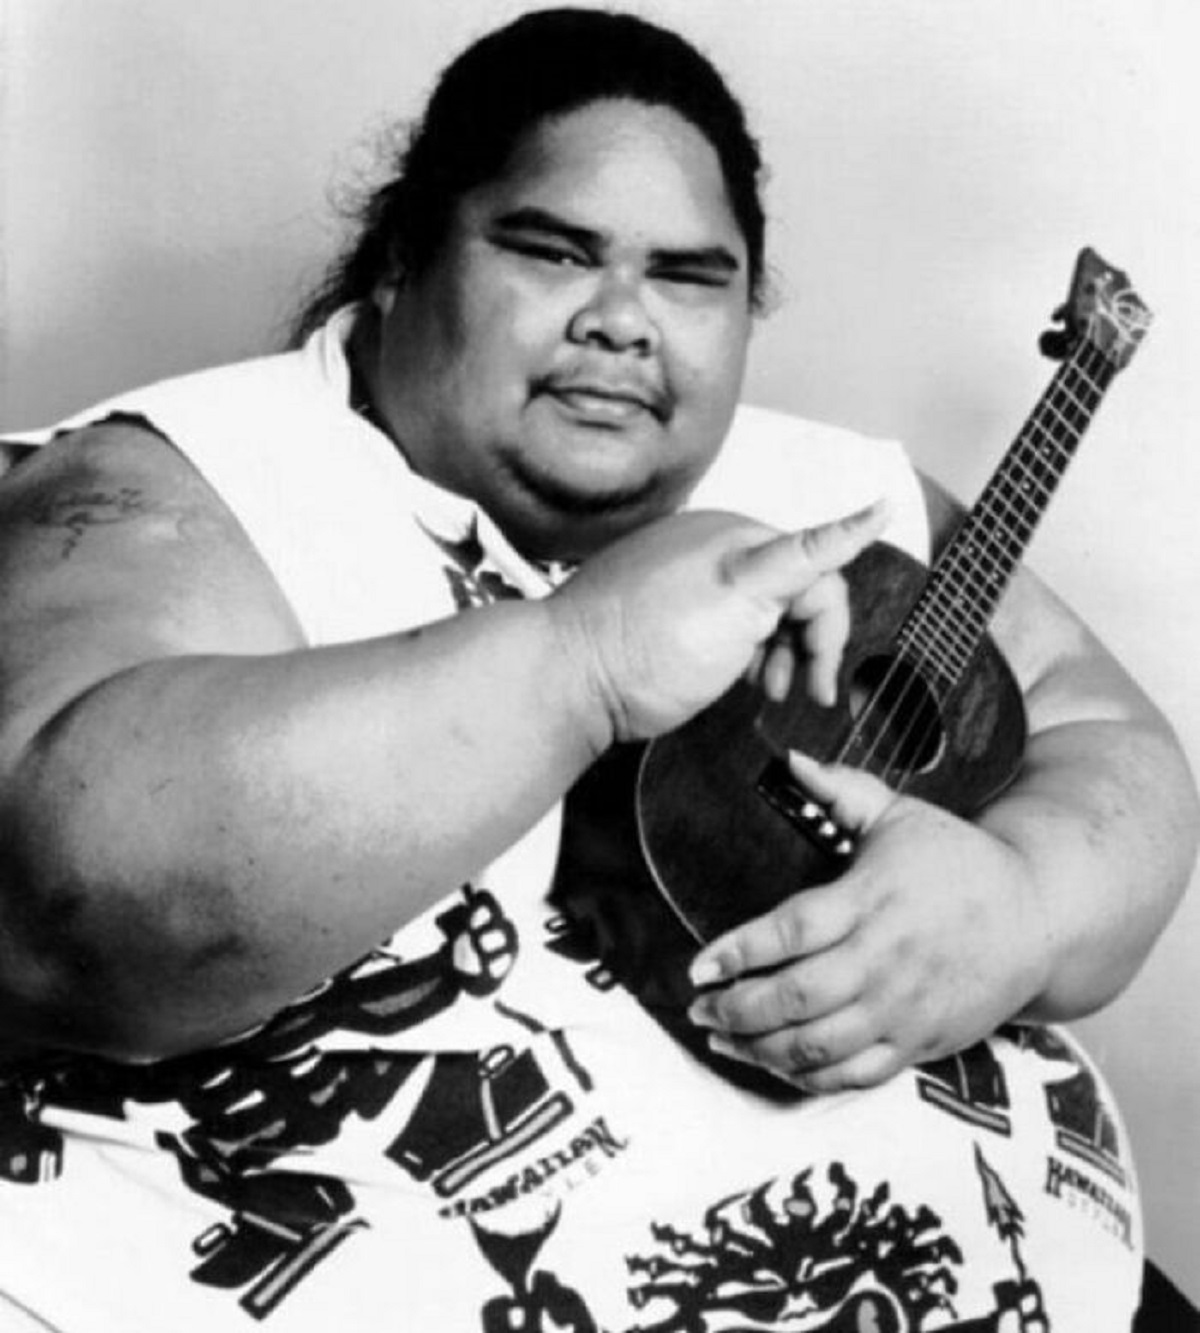 At 3 A.m. One Night In 1988, Hawaiian Singer Israel Kamakawiwo'ole Called A Local Studio And Said He Needed To Record Something Immediately. He Pleaded With The Engineer: "Please, Can I Come In? I Have An Idea." Kamakawiwo'ole Recorded The Iconic Version Of "Somewhere Over The Rainbow" In One Take, Which Would Soon Touch Countless People Across The Globe